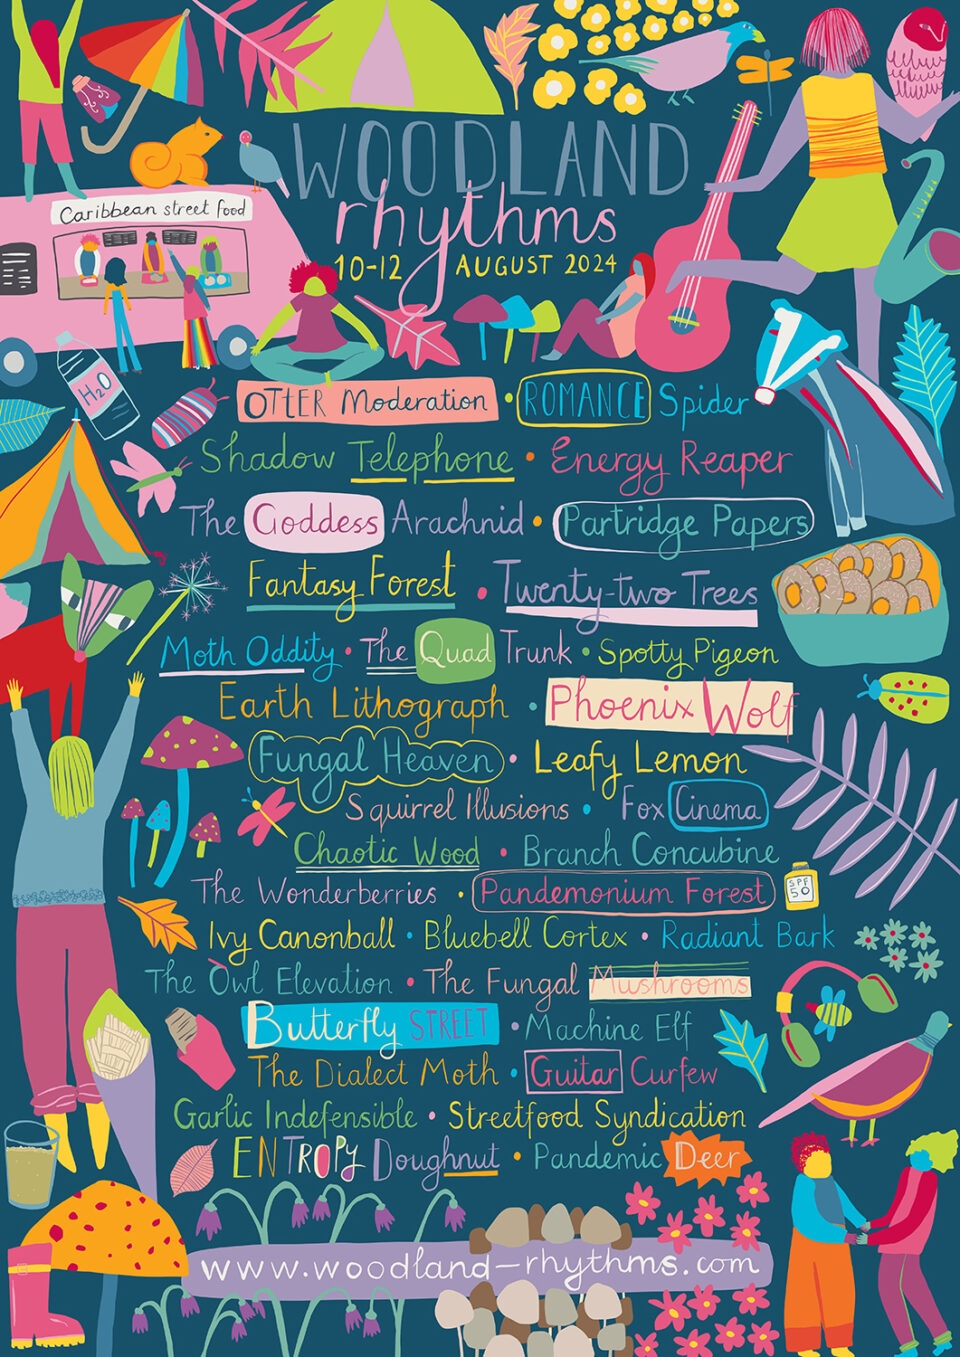 Music Festival Poster for an imaginary music festival. On a dark blue background with lots of colourful elements, including people dancing, woodland creatures, musical instruments, mushrooms and flowers and streetfood, and hand-lettered made-up band names. Illustrated by Tasha Goddard.